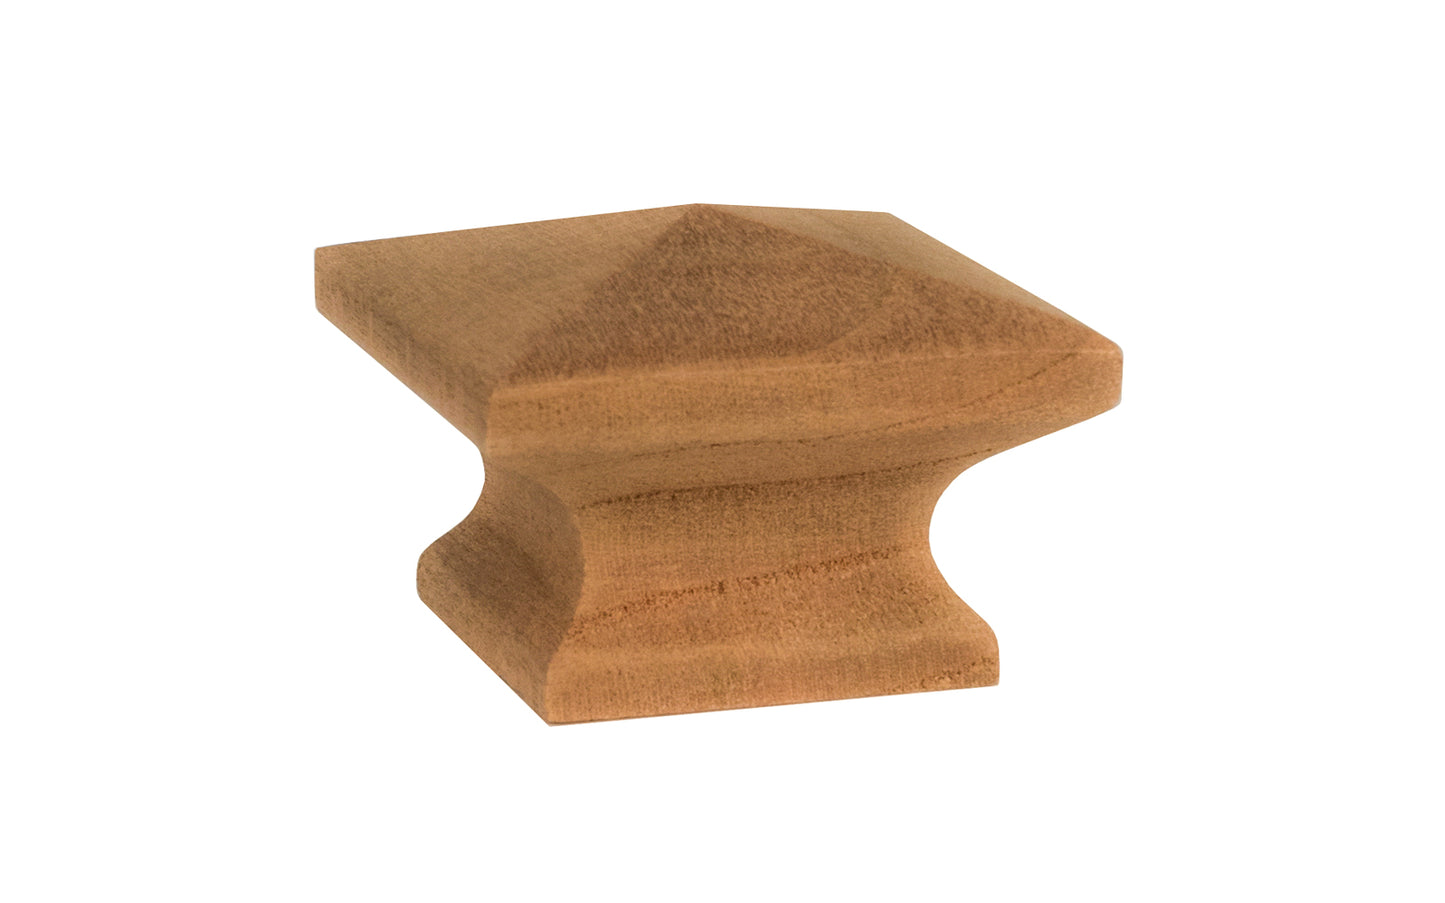 A classic wood pyramid cabinet knob of solid Cherry material. This good-looking wooden knob has a slight pyramid design & square edges. Designed in the Mission-style / Arts & Crafts, Craftsman style of hardware. Unfinished solid oak wood. May be stained, painted, or varnished. 1-1/4" x 1-1/4" size.